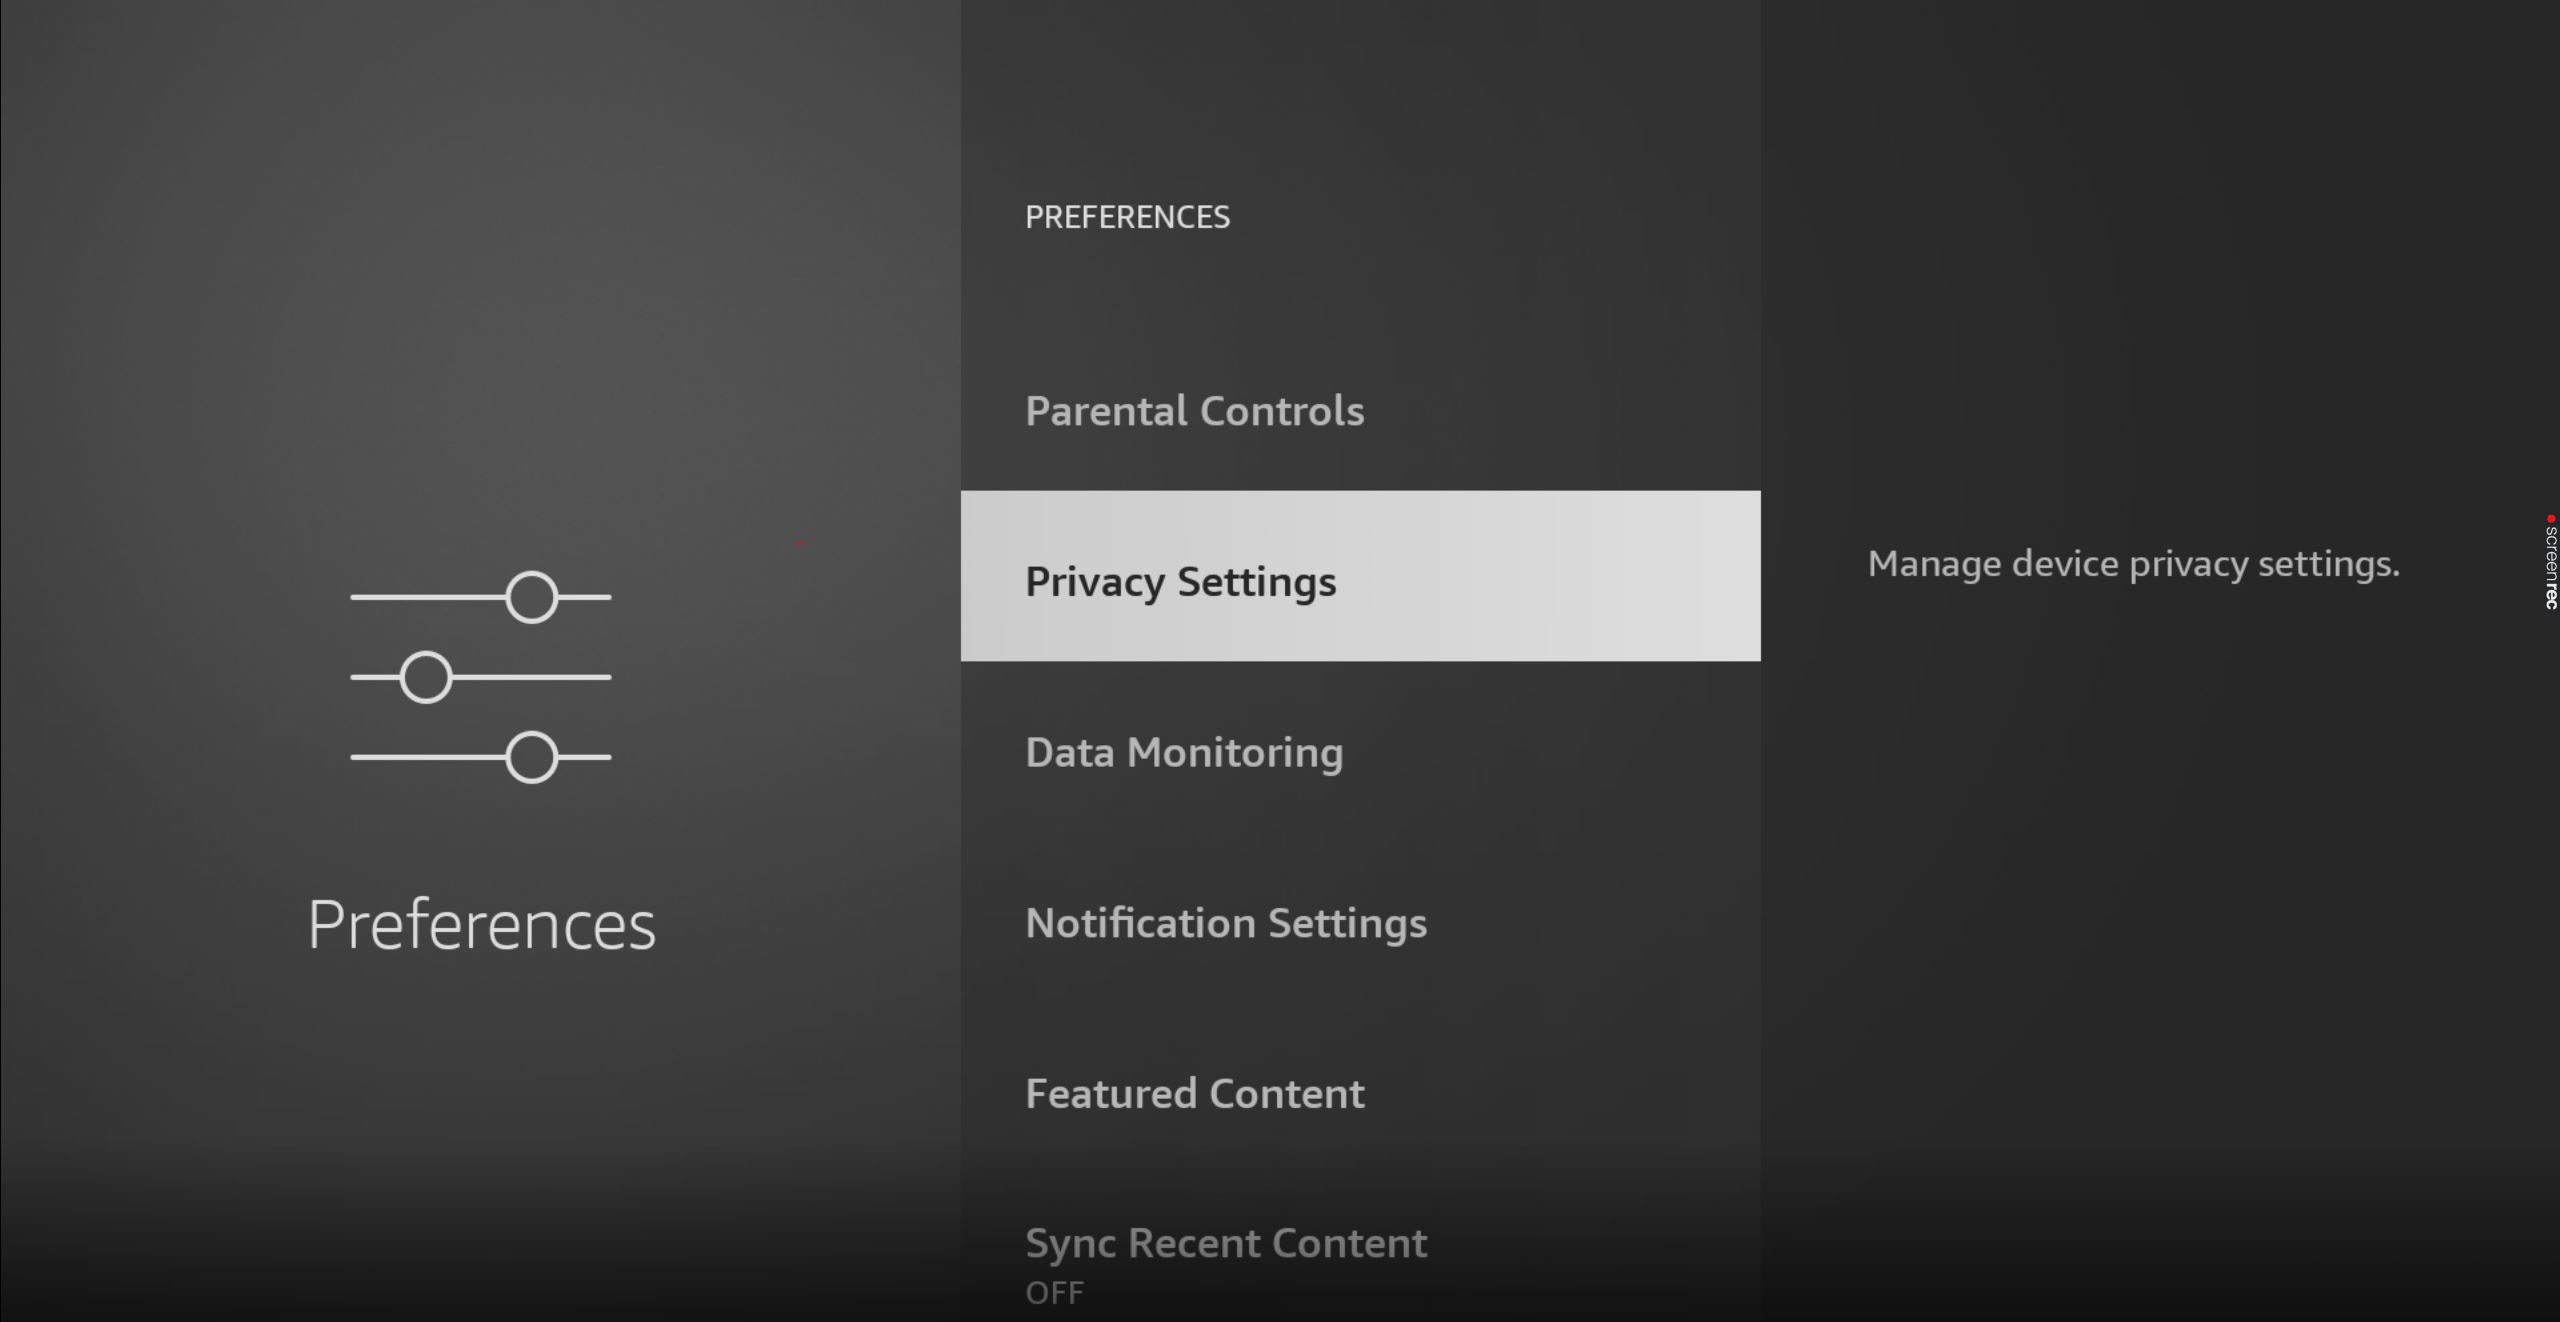 How to Access Privacy Settings on Amazon Firestick